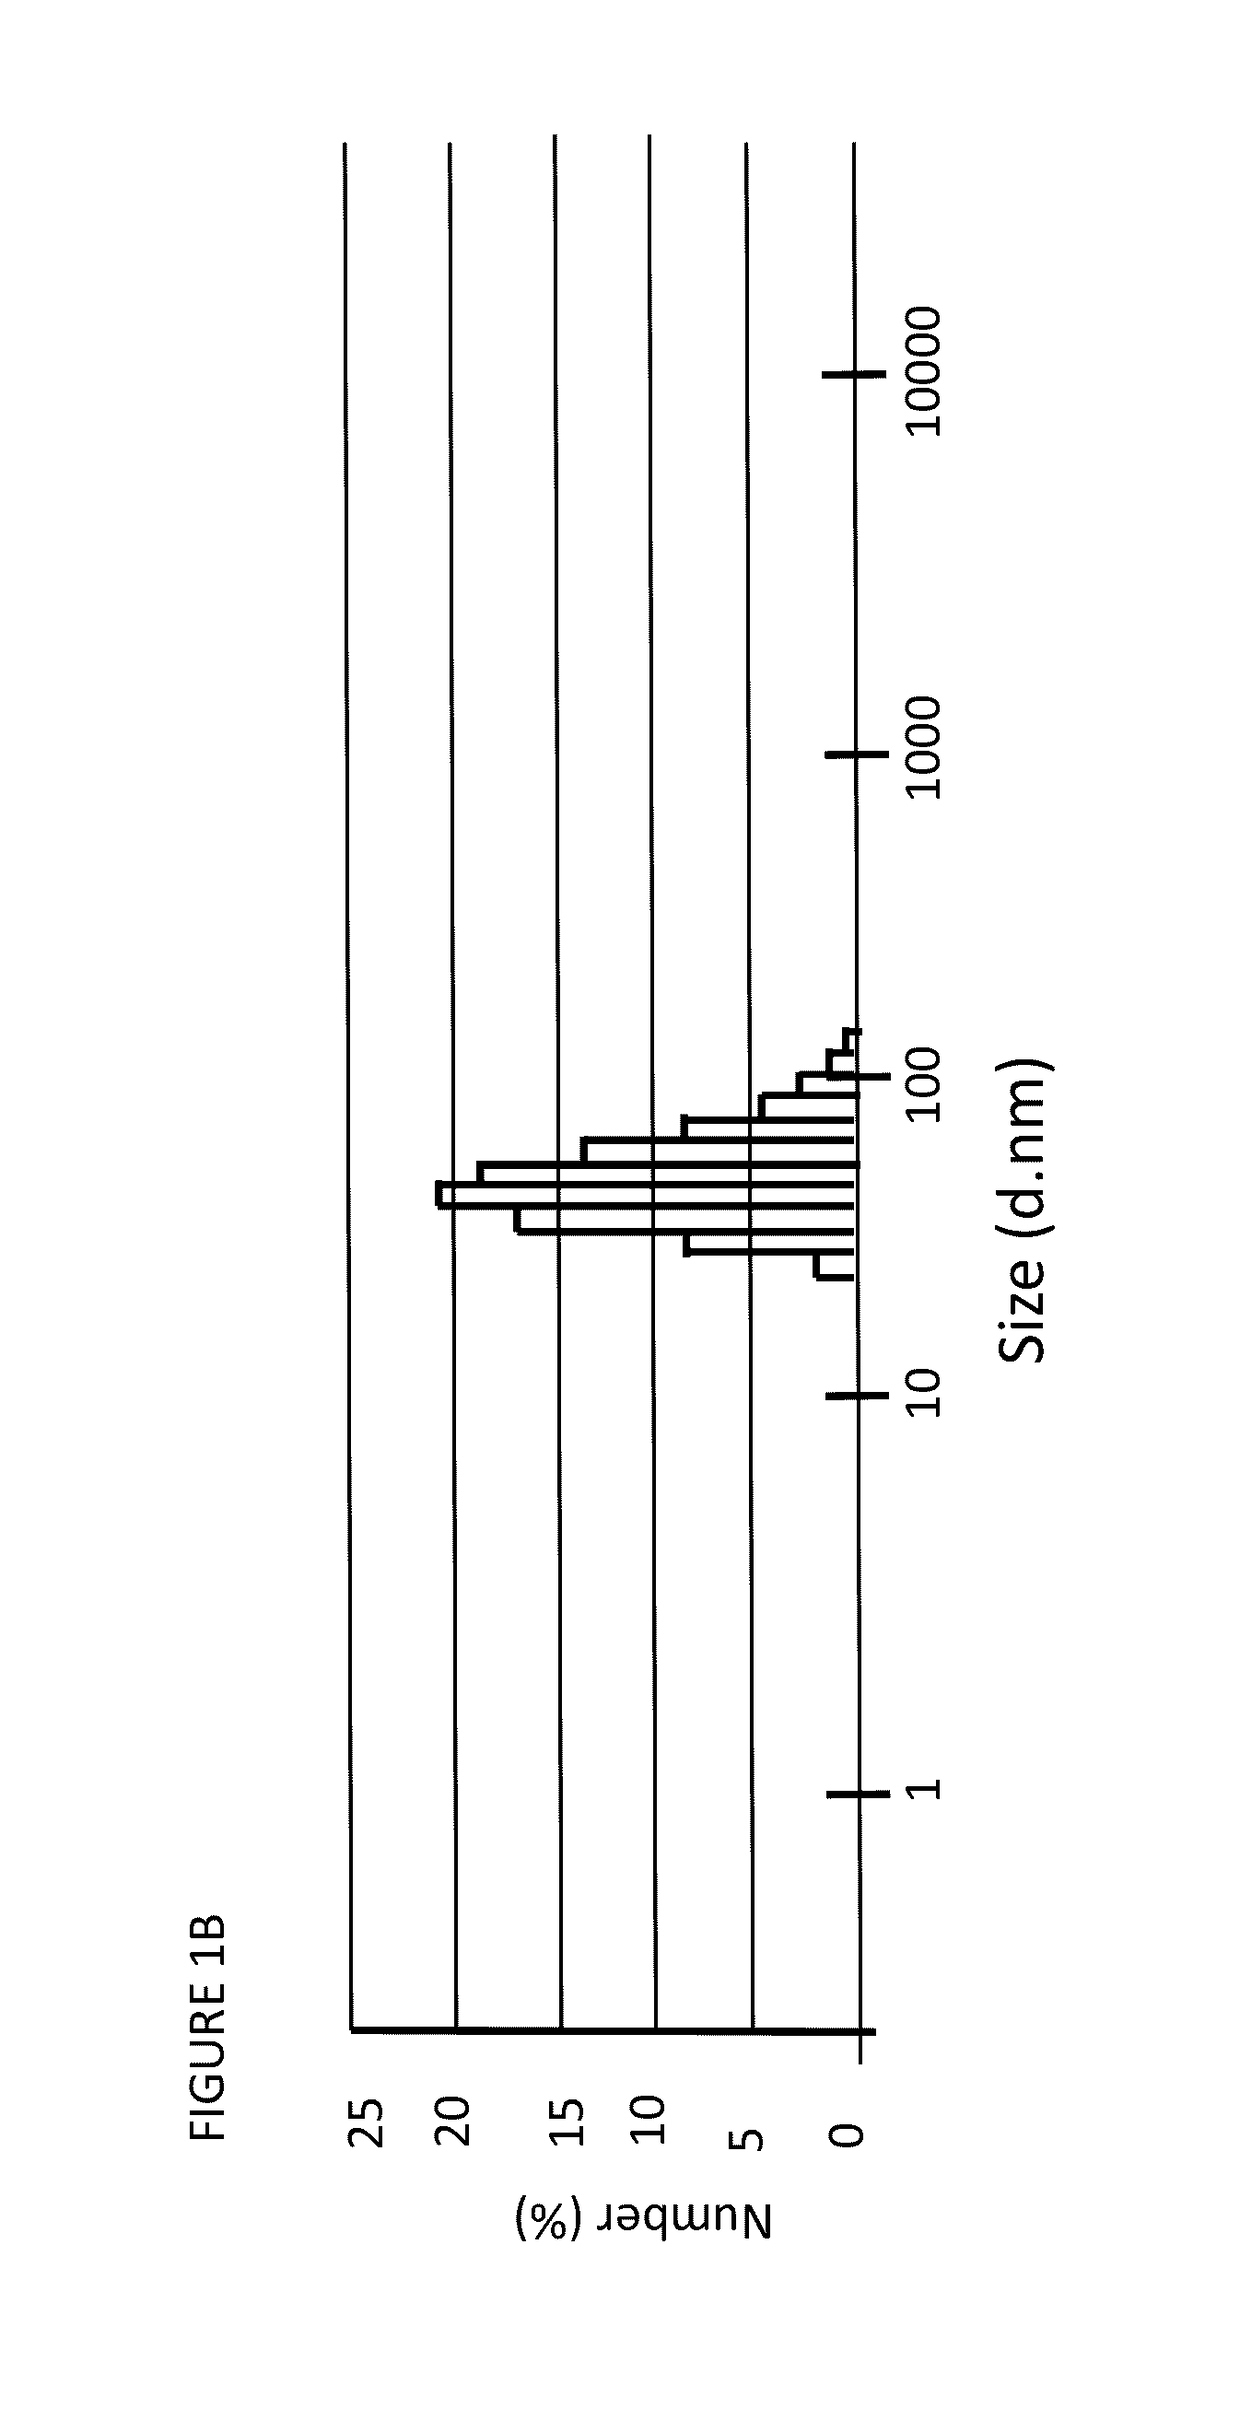 Nanostructures for modulating intercellular communication and uses thereof